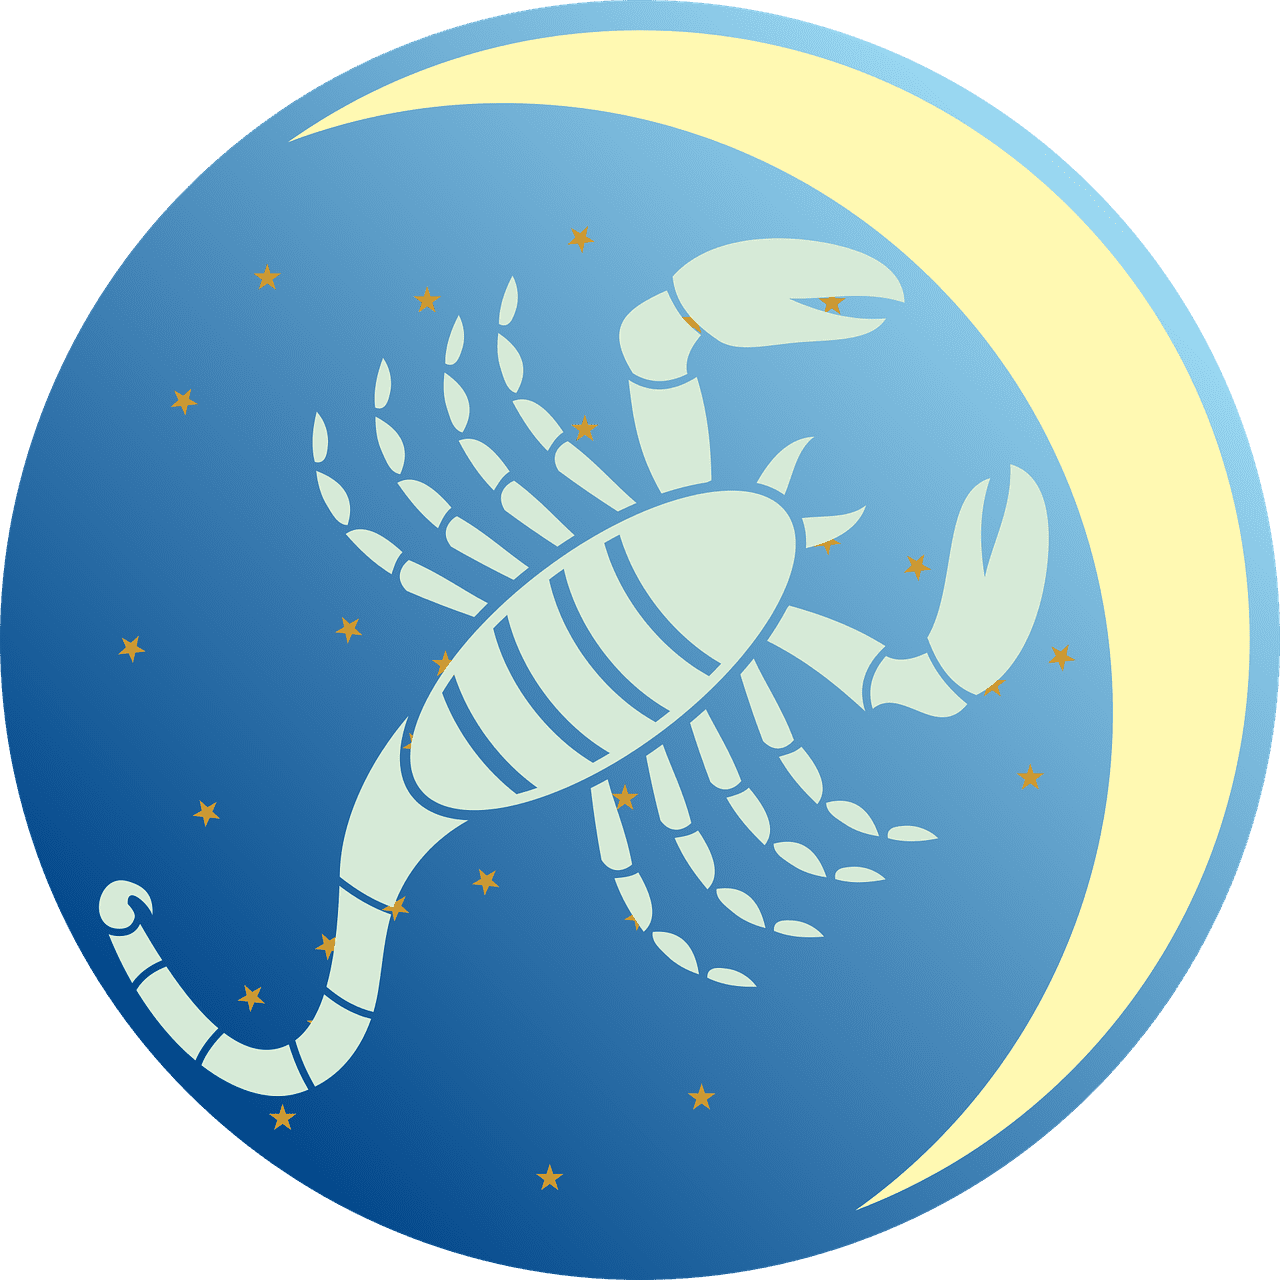 A depiction of the Scorpio star sign | Photo: Pixabay